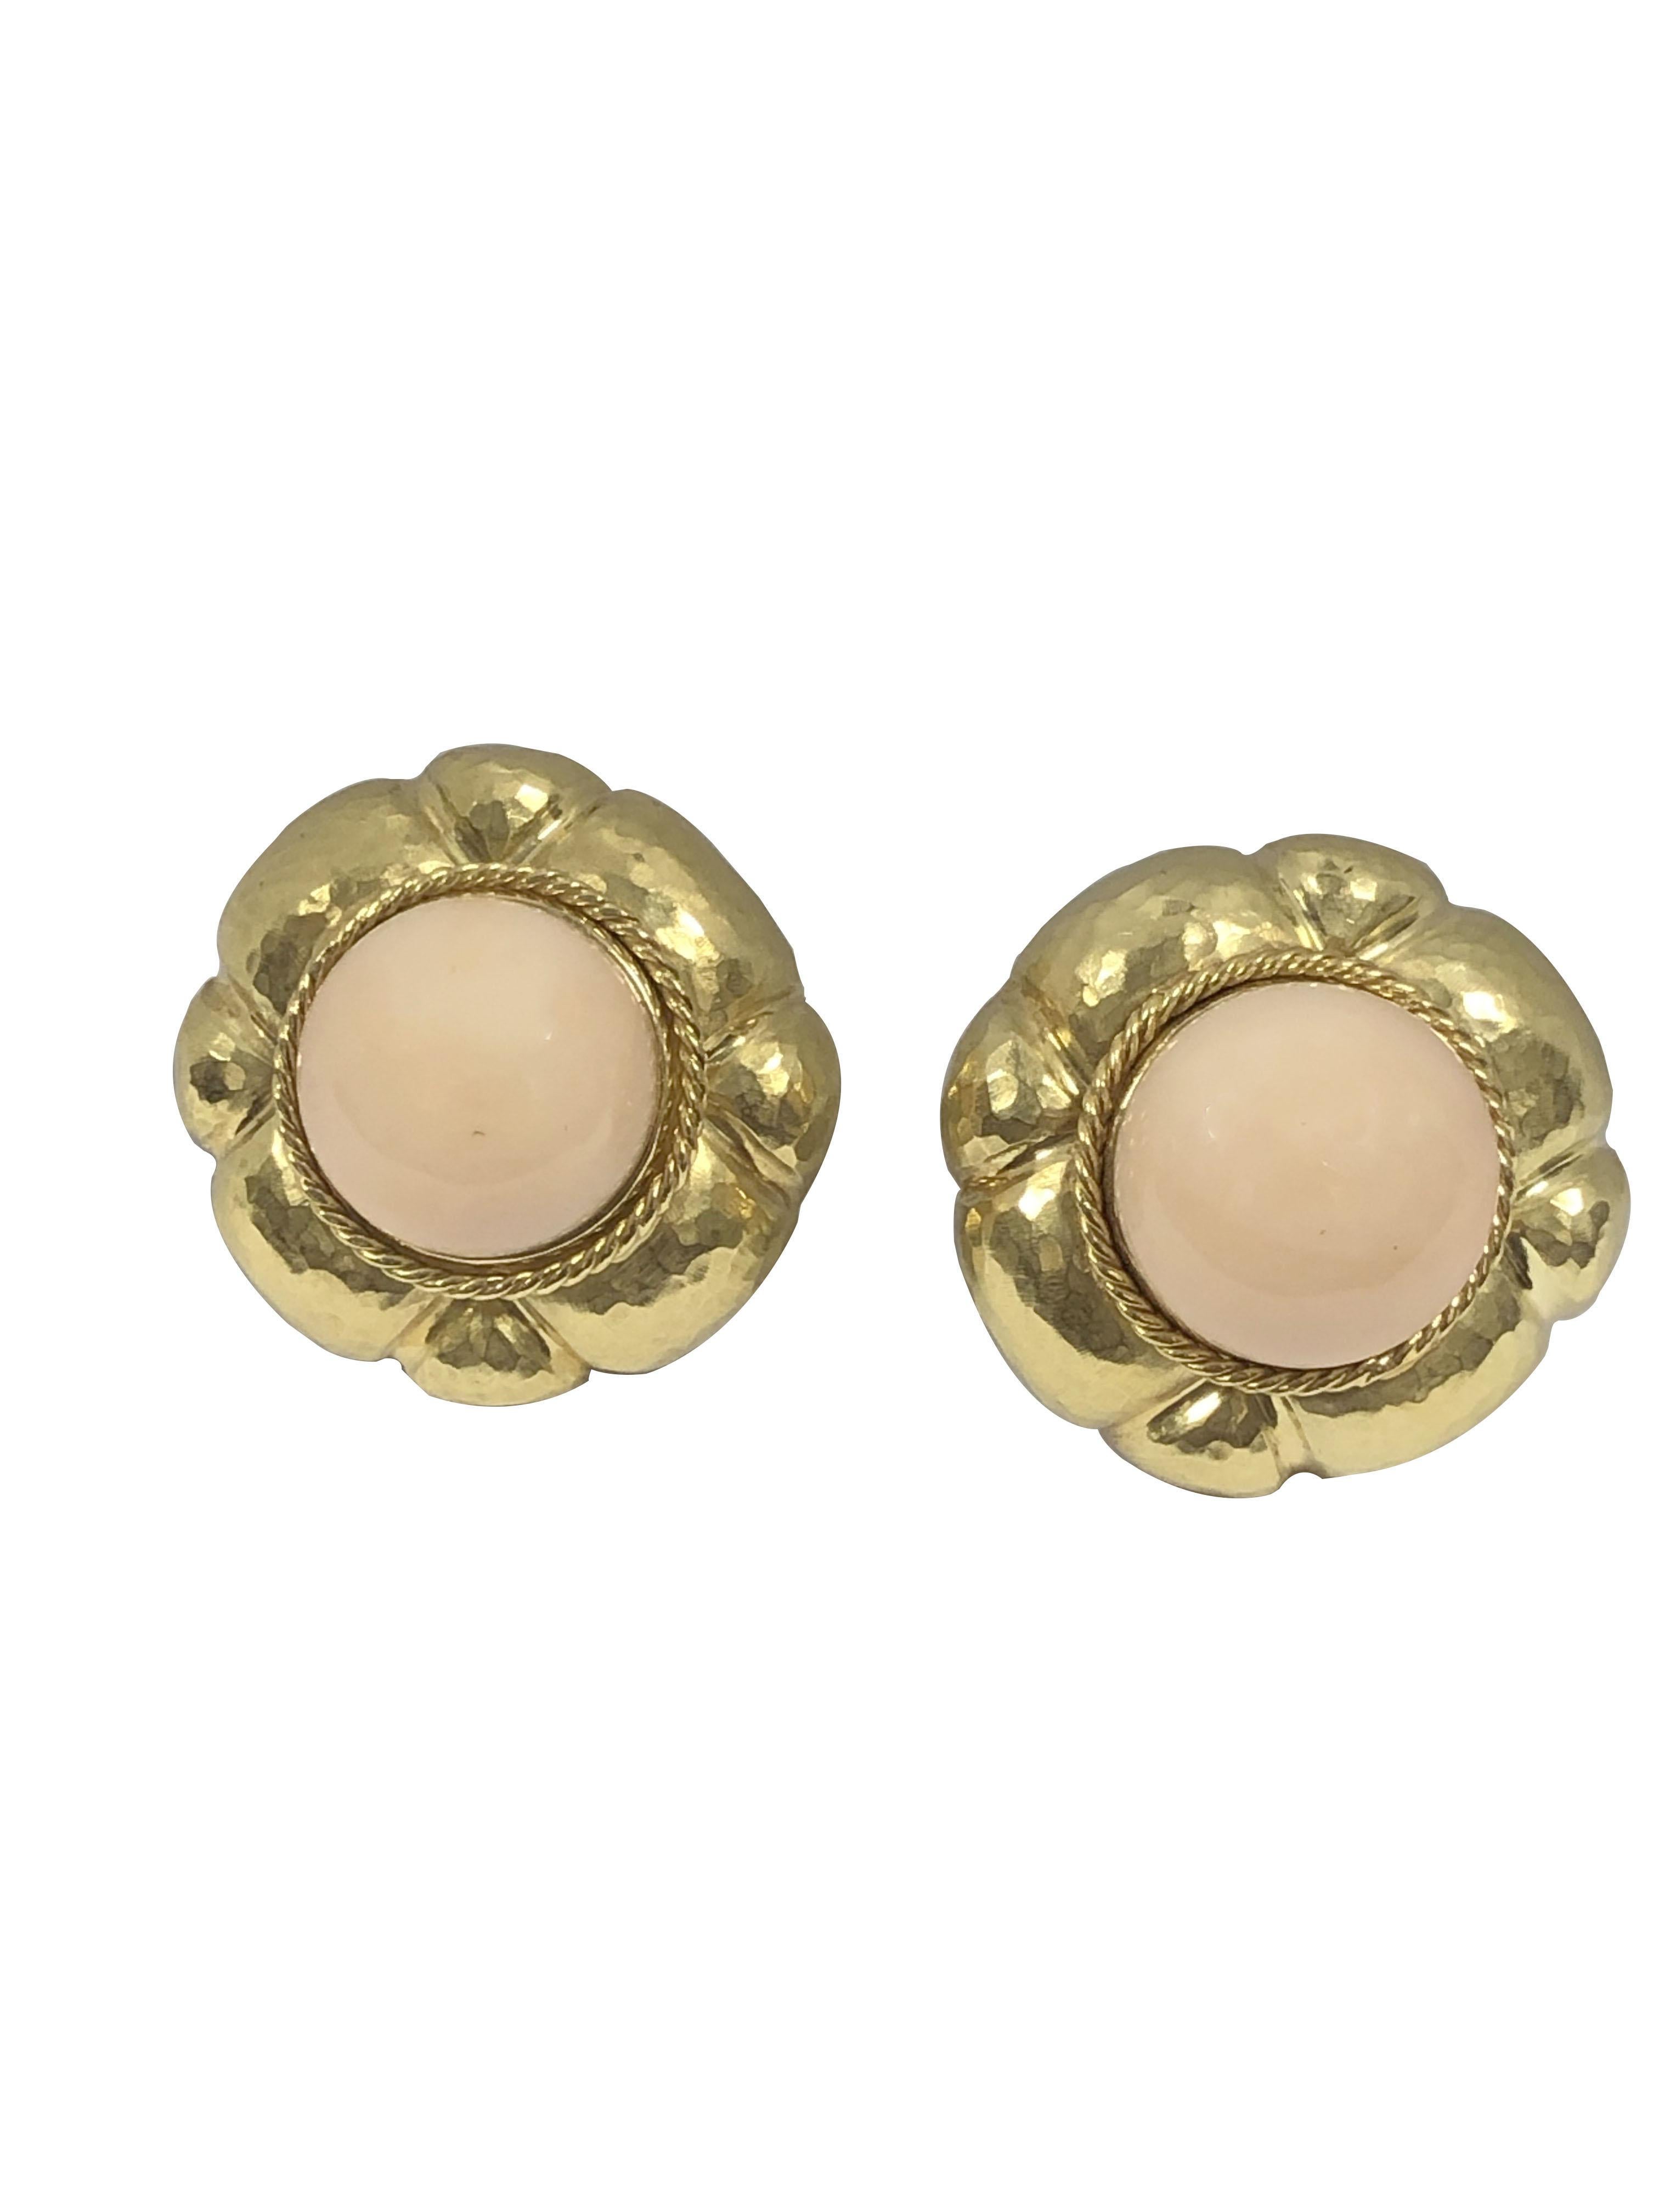 Circa 1990s 18K Yellow Gold Hand Hammered Earrings, measuring 1 1/8 inches in diameter, centrally set with a Light Pink Angel Skin Coral Button measuring 16 M.M. within a twisted Rope Border. Omega clip backs with a Post. 